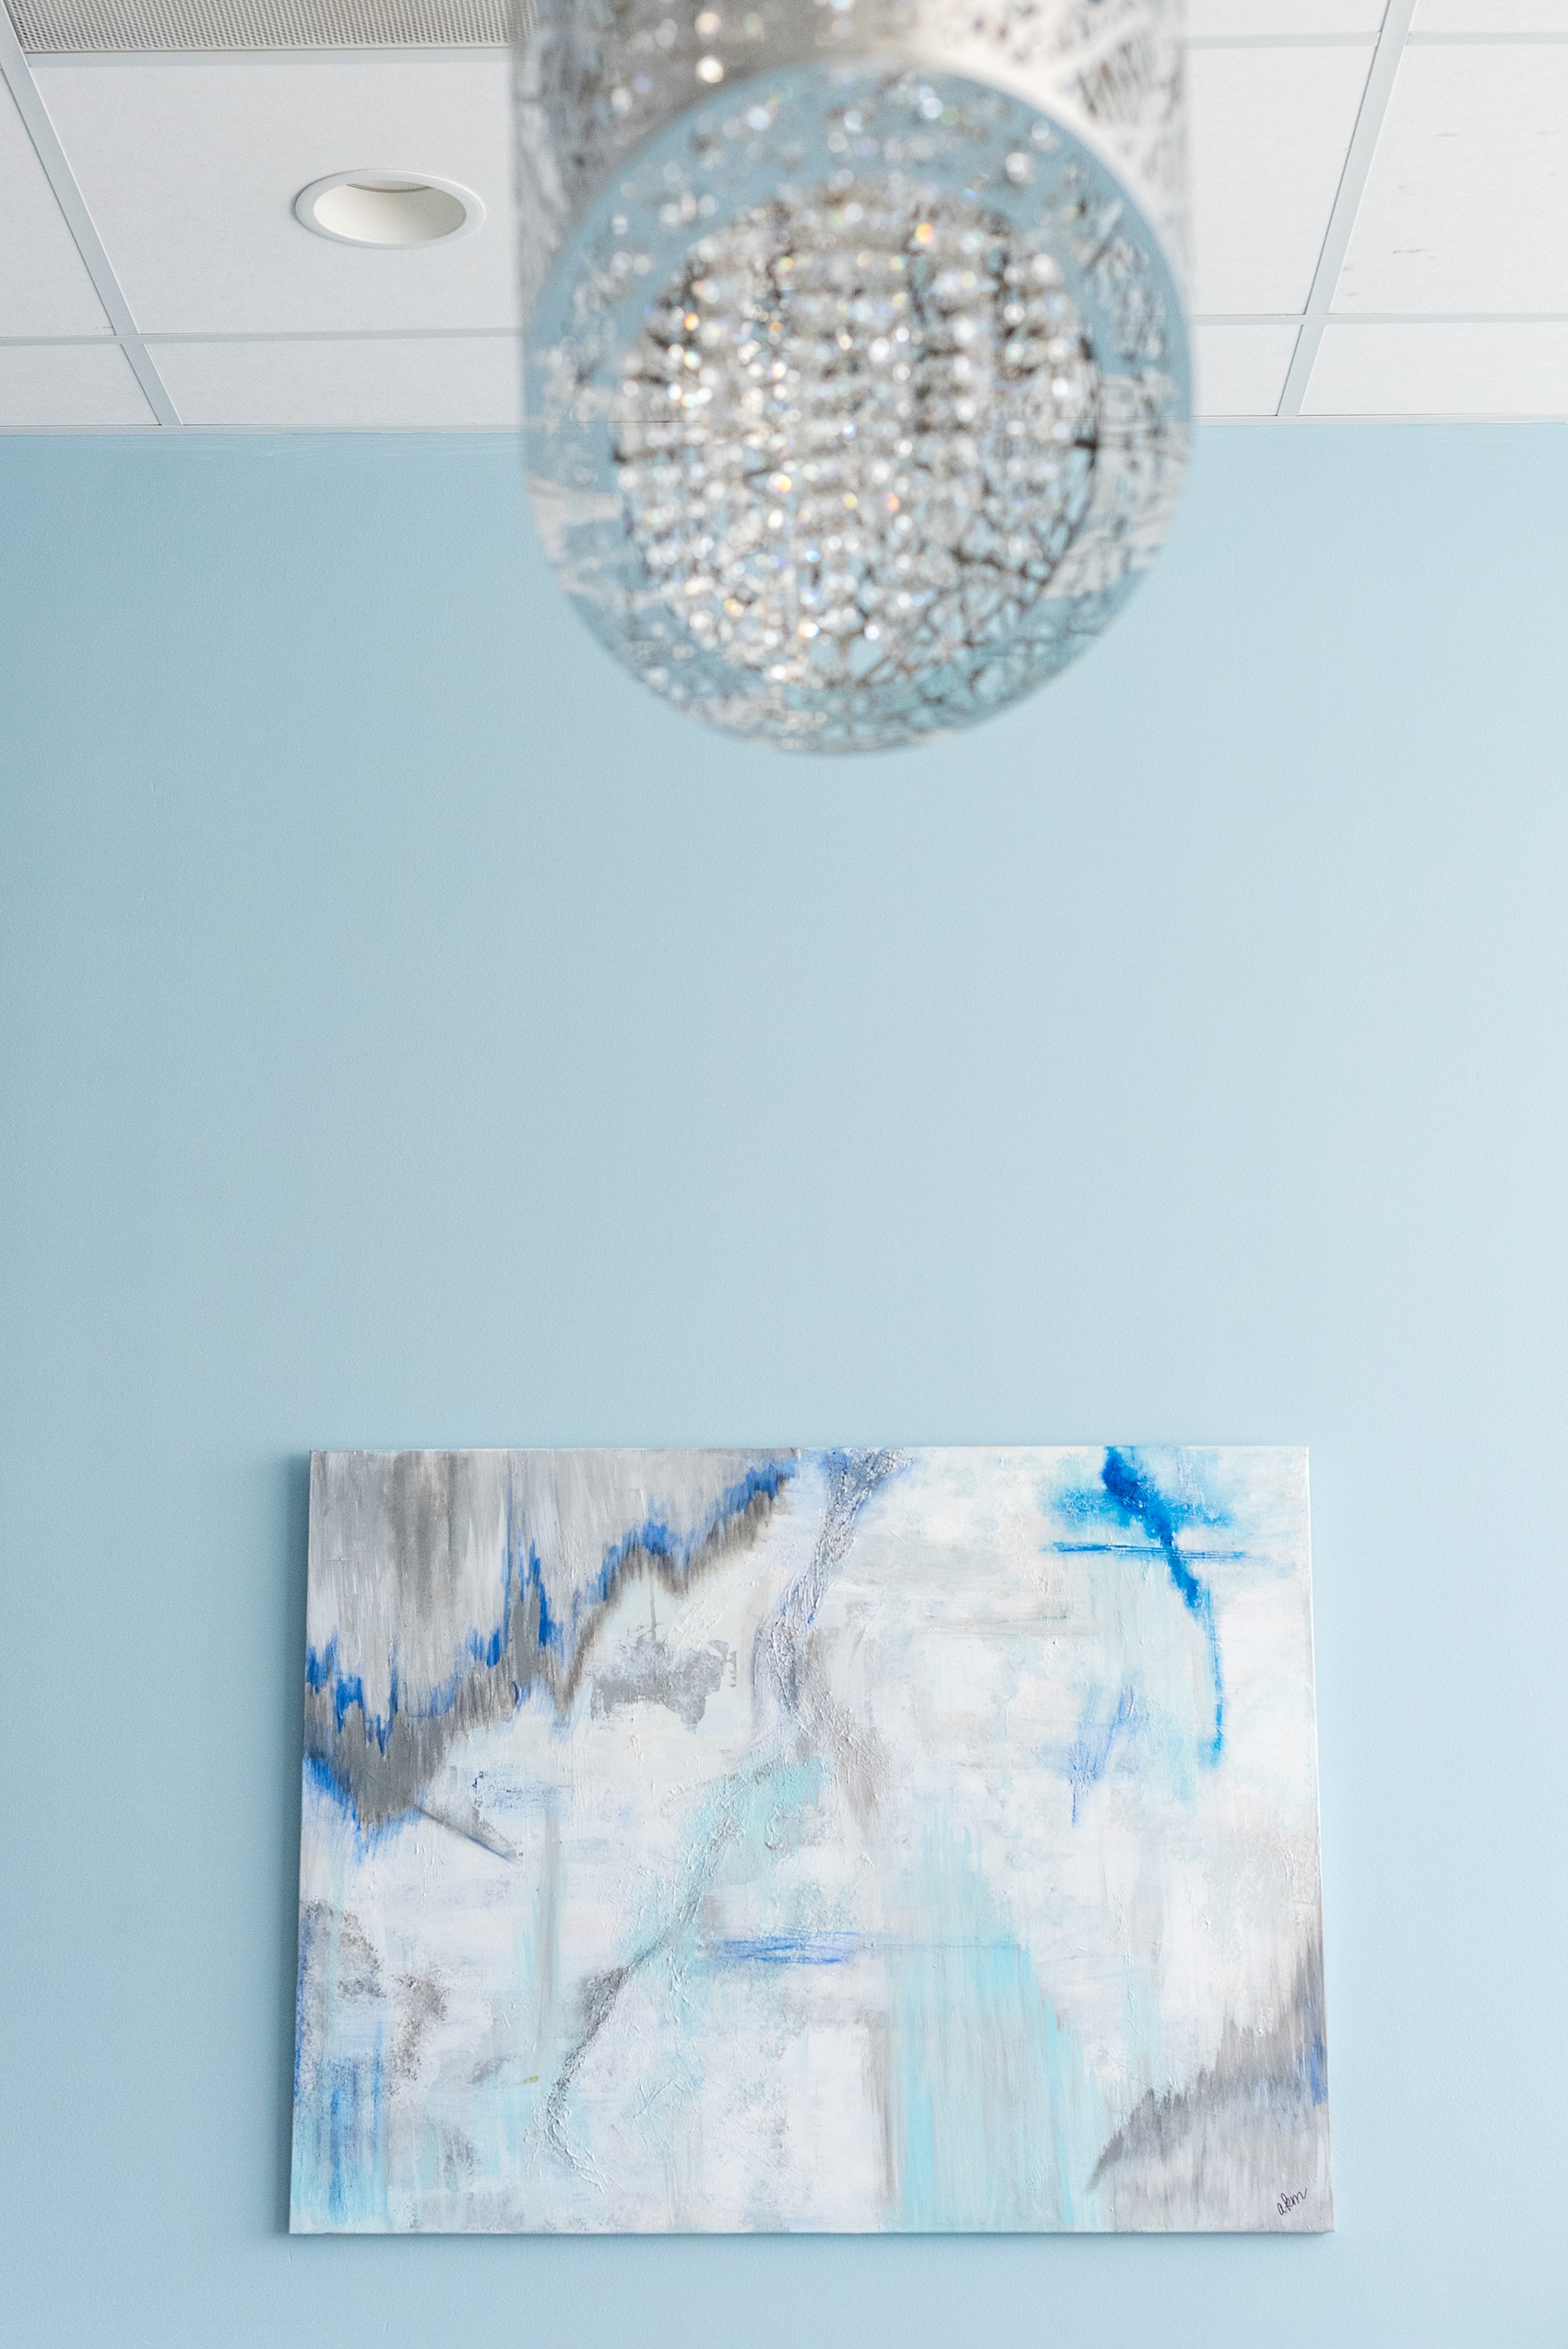 Downtown Raleigh wedding venue photos of Vidrio on Glenwood South, and their beautiful new bridal suite. Blue hues and neutral furniture are framed by paintings and a chandelier light fixture in this pretty space. #MikkelPaige #Vidrio #DowntownRaleigh #RaleighWeddingVenues